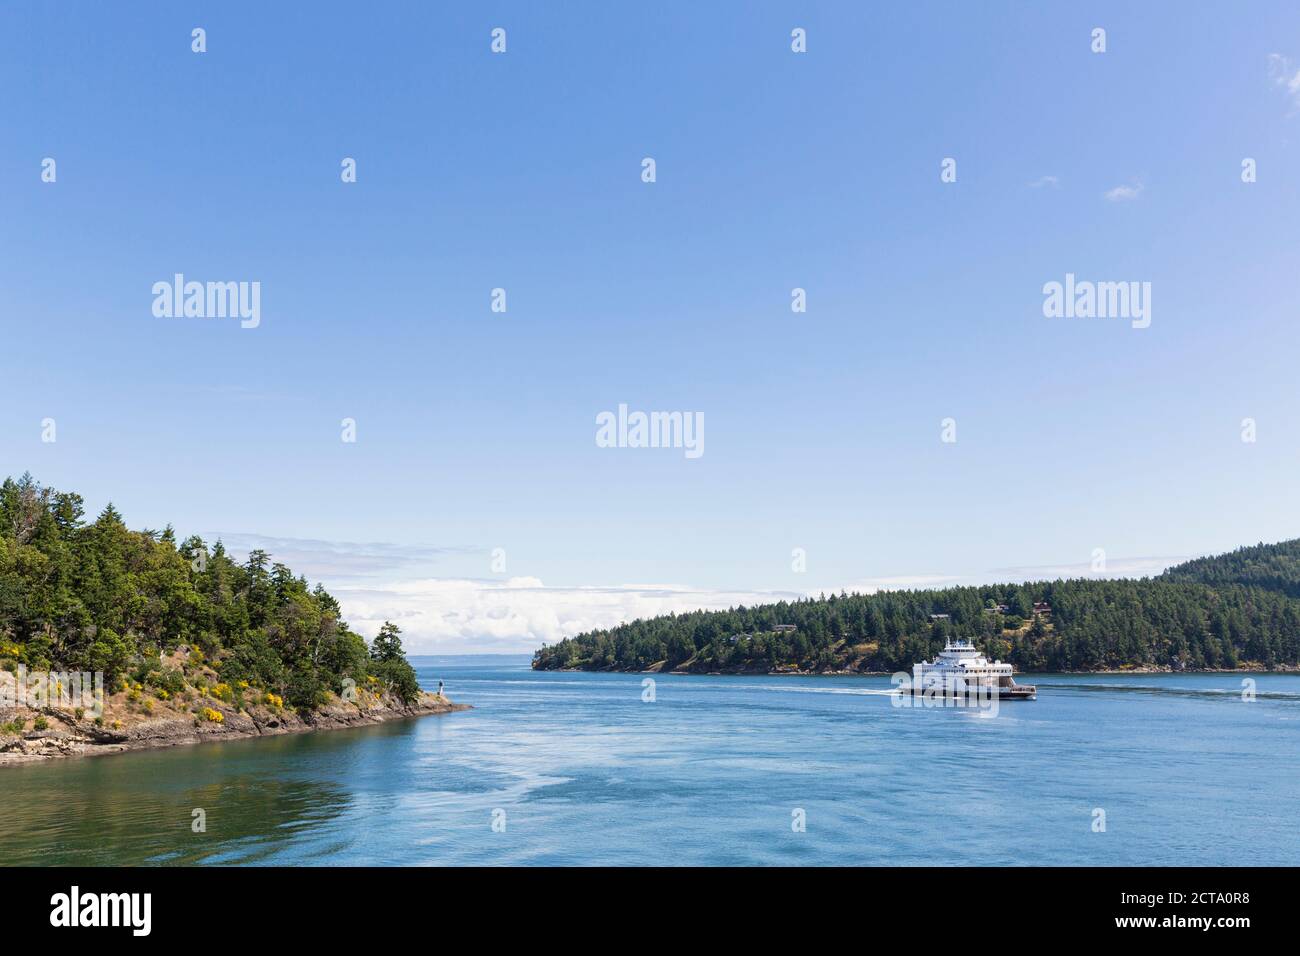 Canada, British Columbia, Vancouver Island, Ferry on the Inside Passage Stock Photo